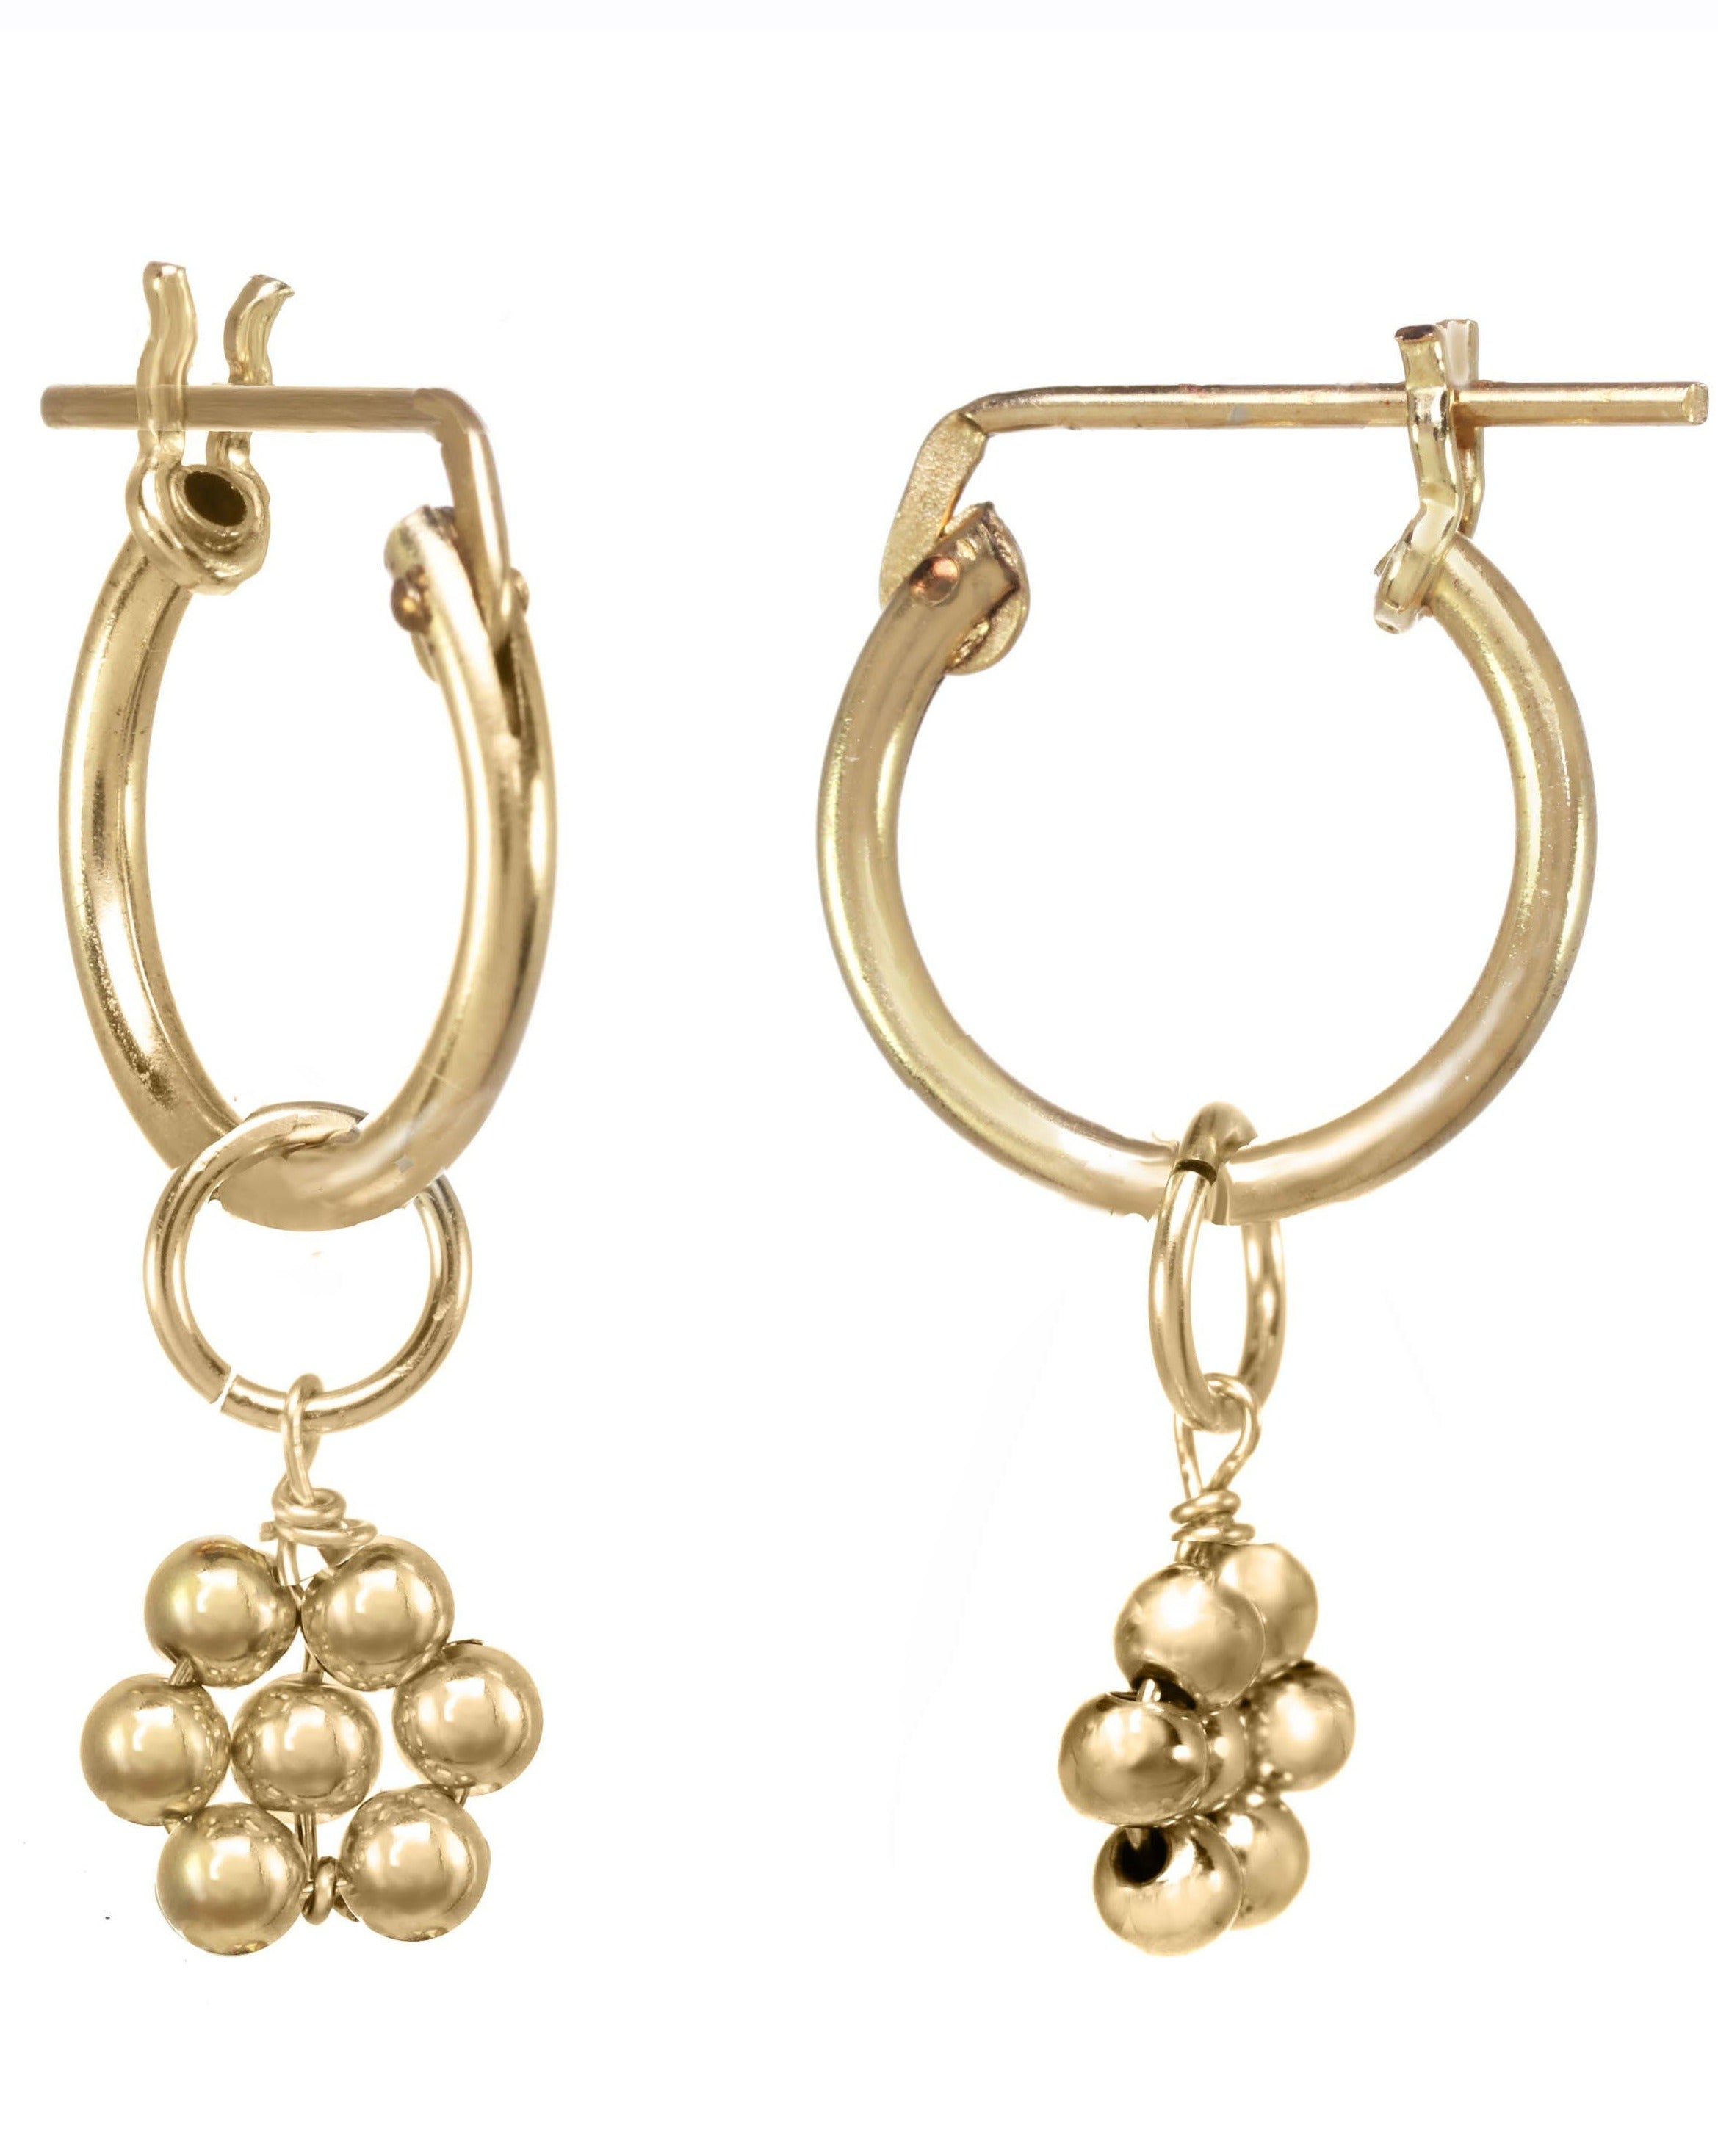 Rosalee Earrings by KOZAKH. 12mm snap closure hoop earrings, crafted in 14K Gold Filled, featuring dangling handmade beaded daisy charms.